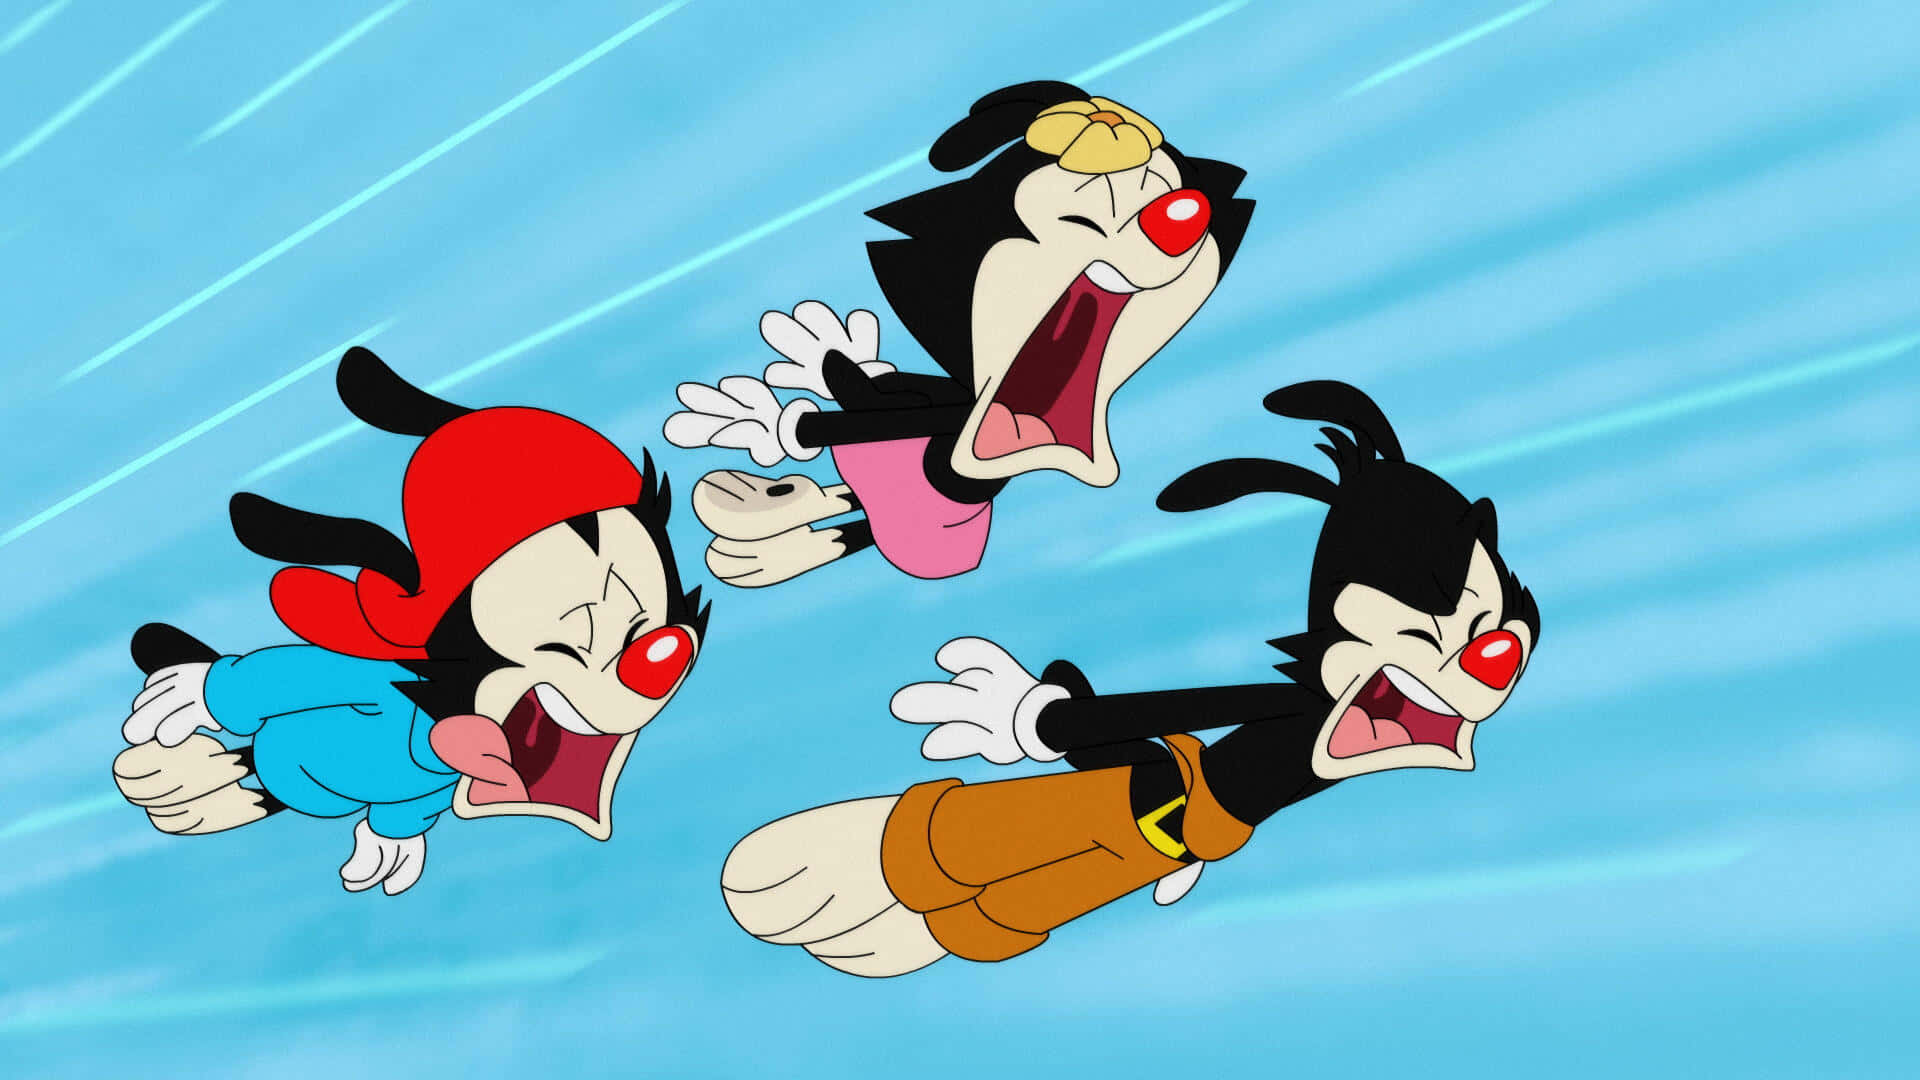 Wake up, it's Animaniacs time!